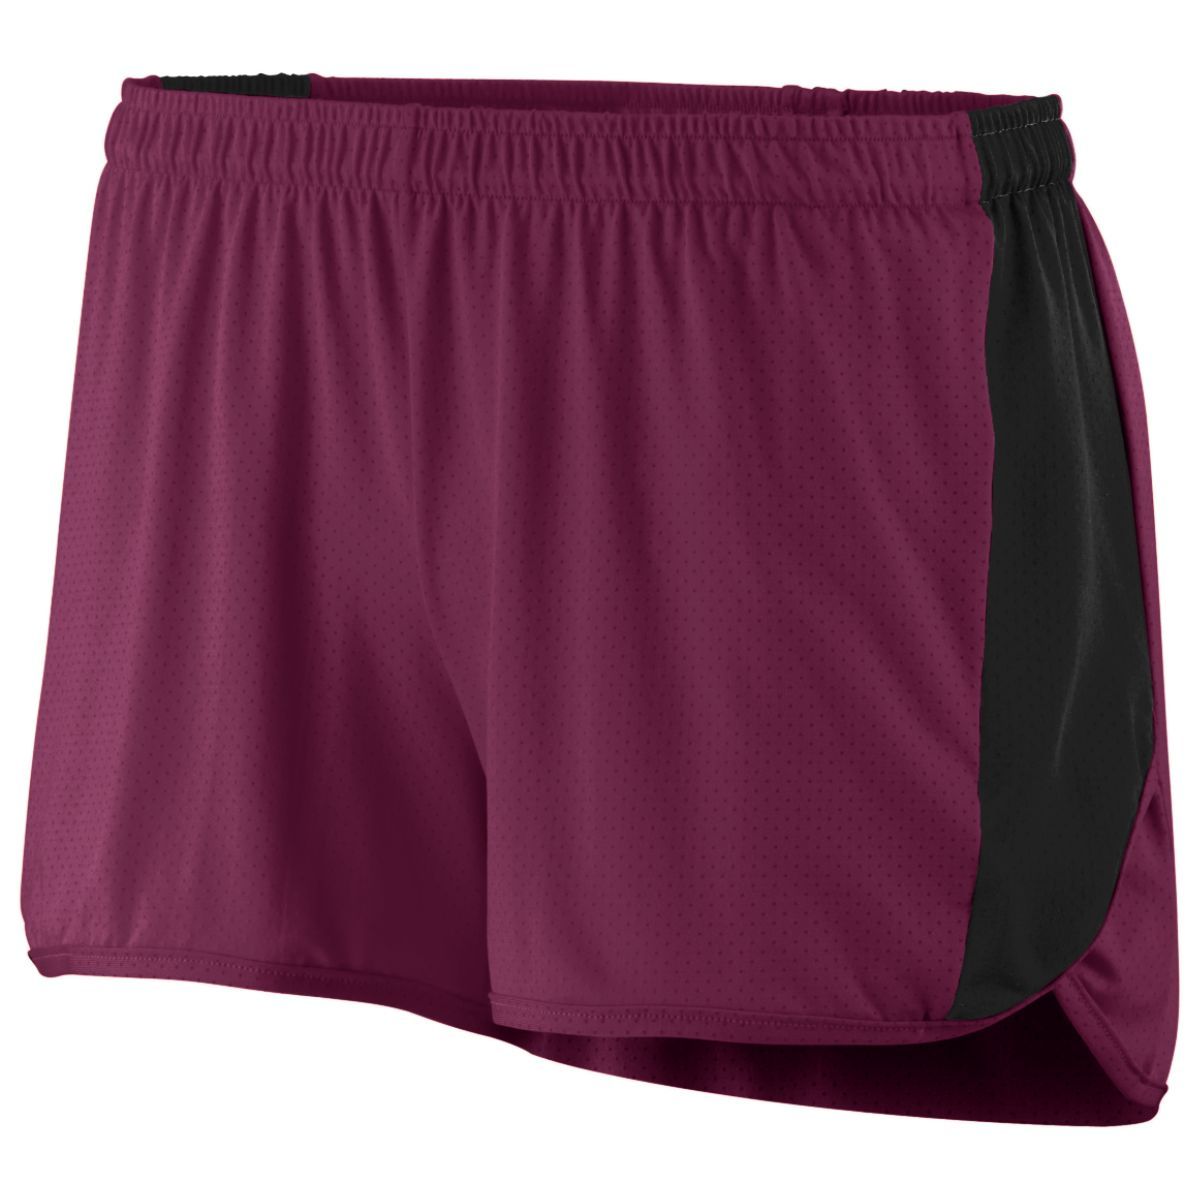 Augusta Sportswear Ladies Sprint Shorts in Maroon/Black  -Part of the Ladies, Ladies-Shorts, Augusta-Products, Track-Field product lines at KanaleyCreations.com